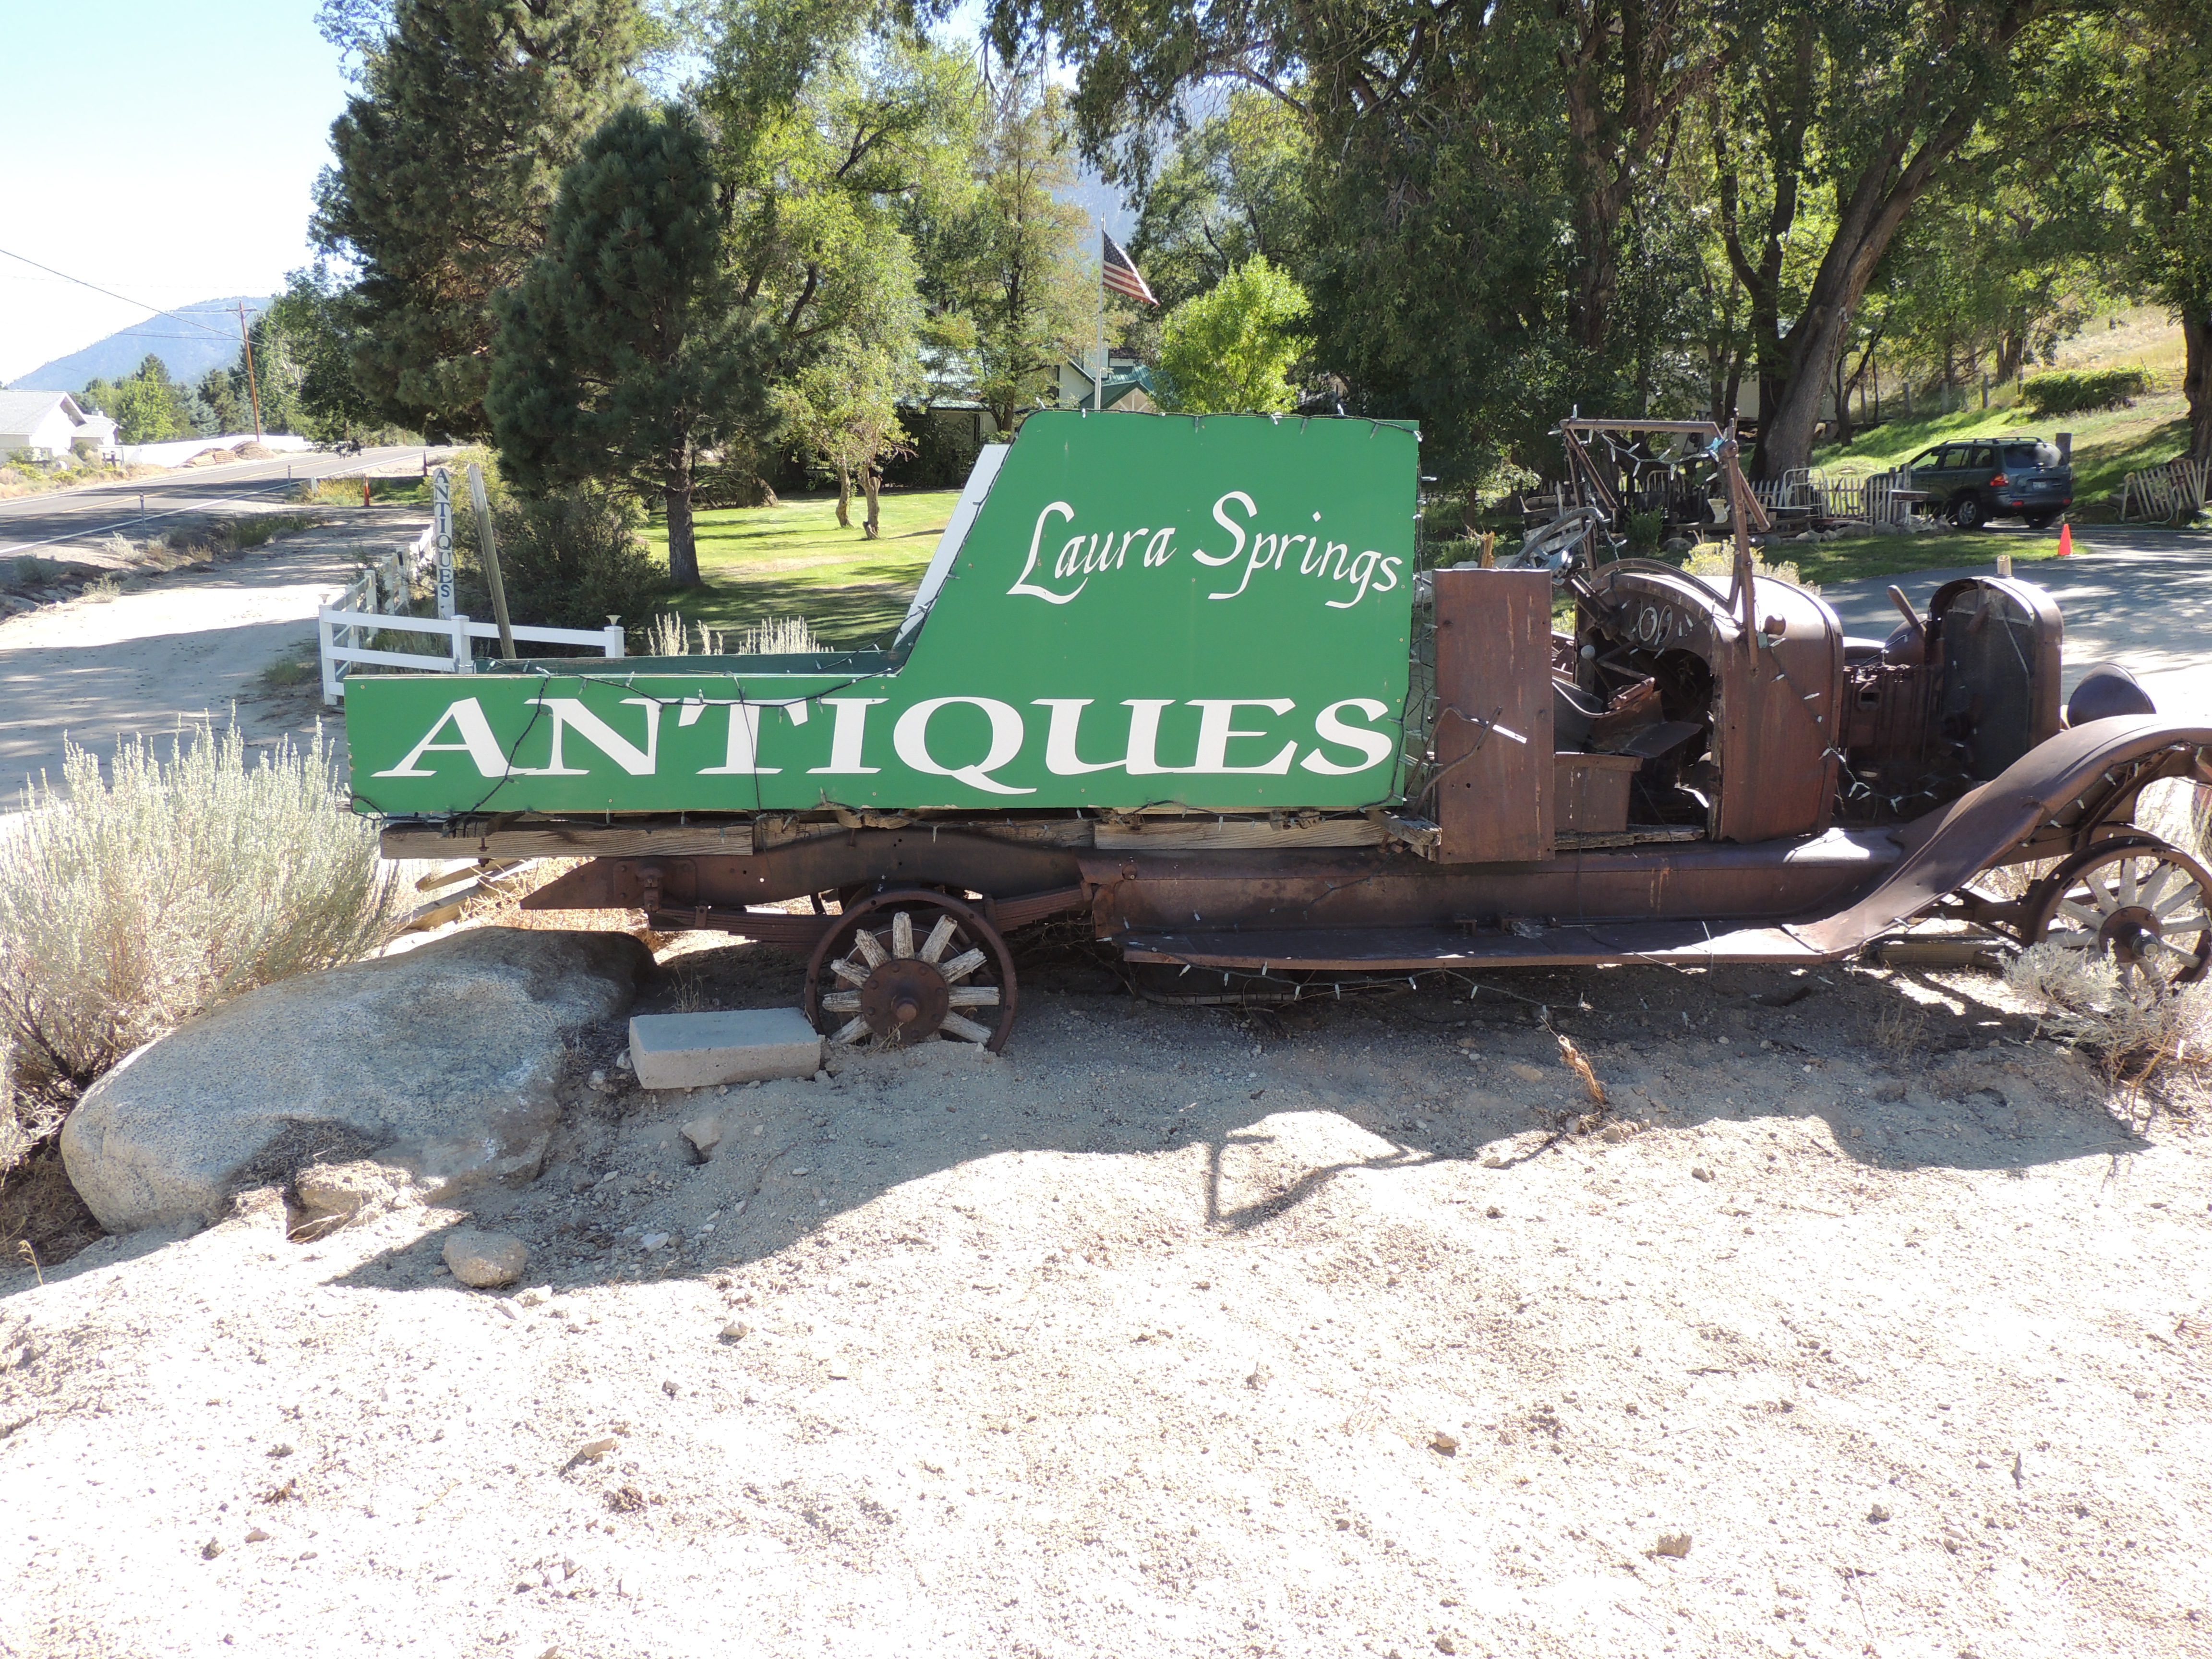 Laura Springs Ranch & Antiques